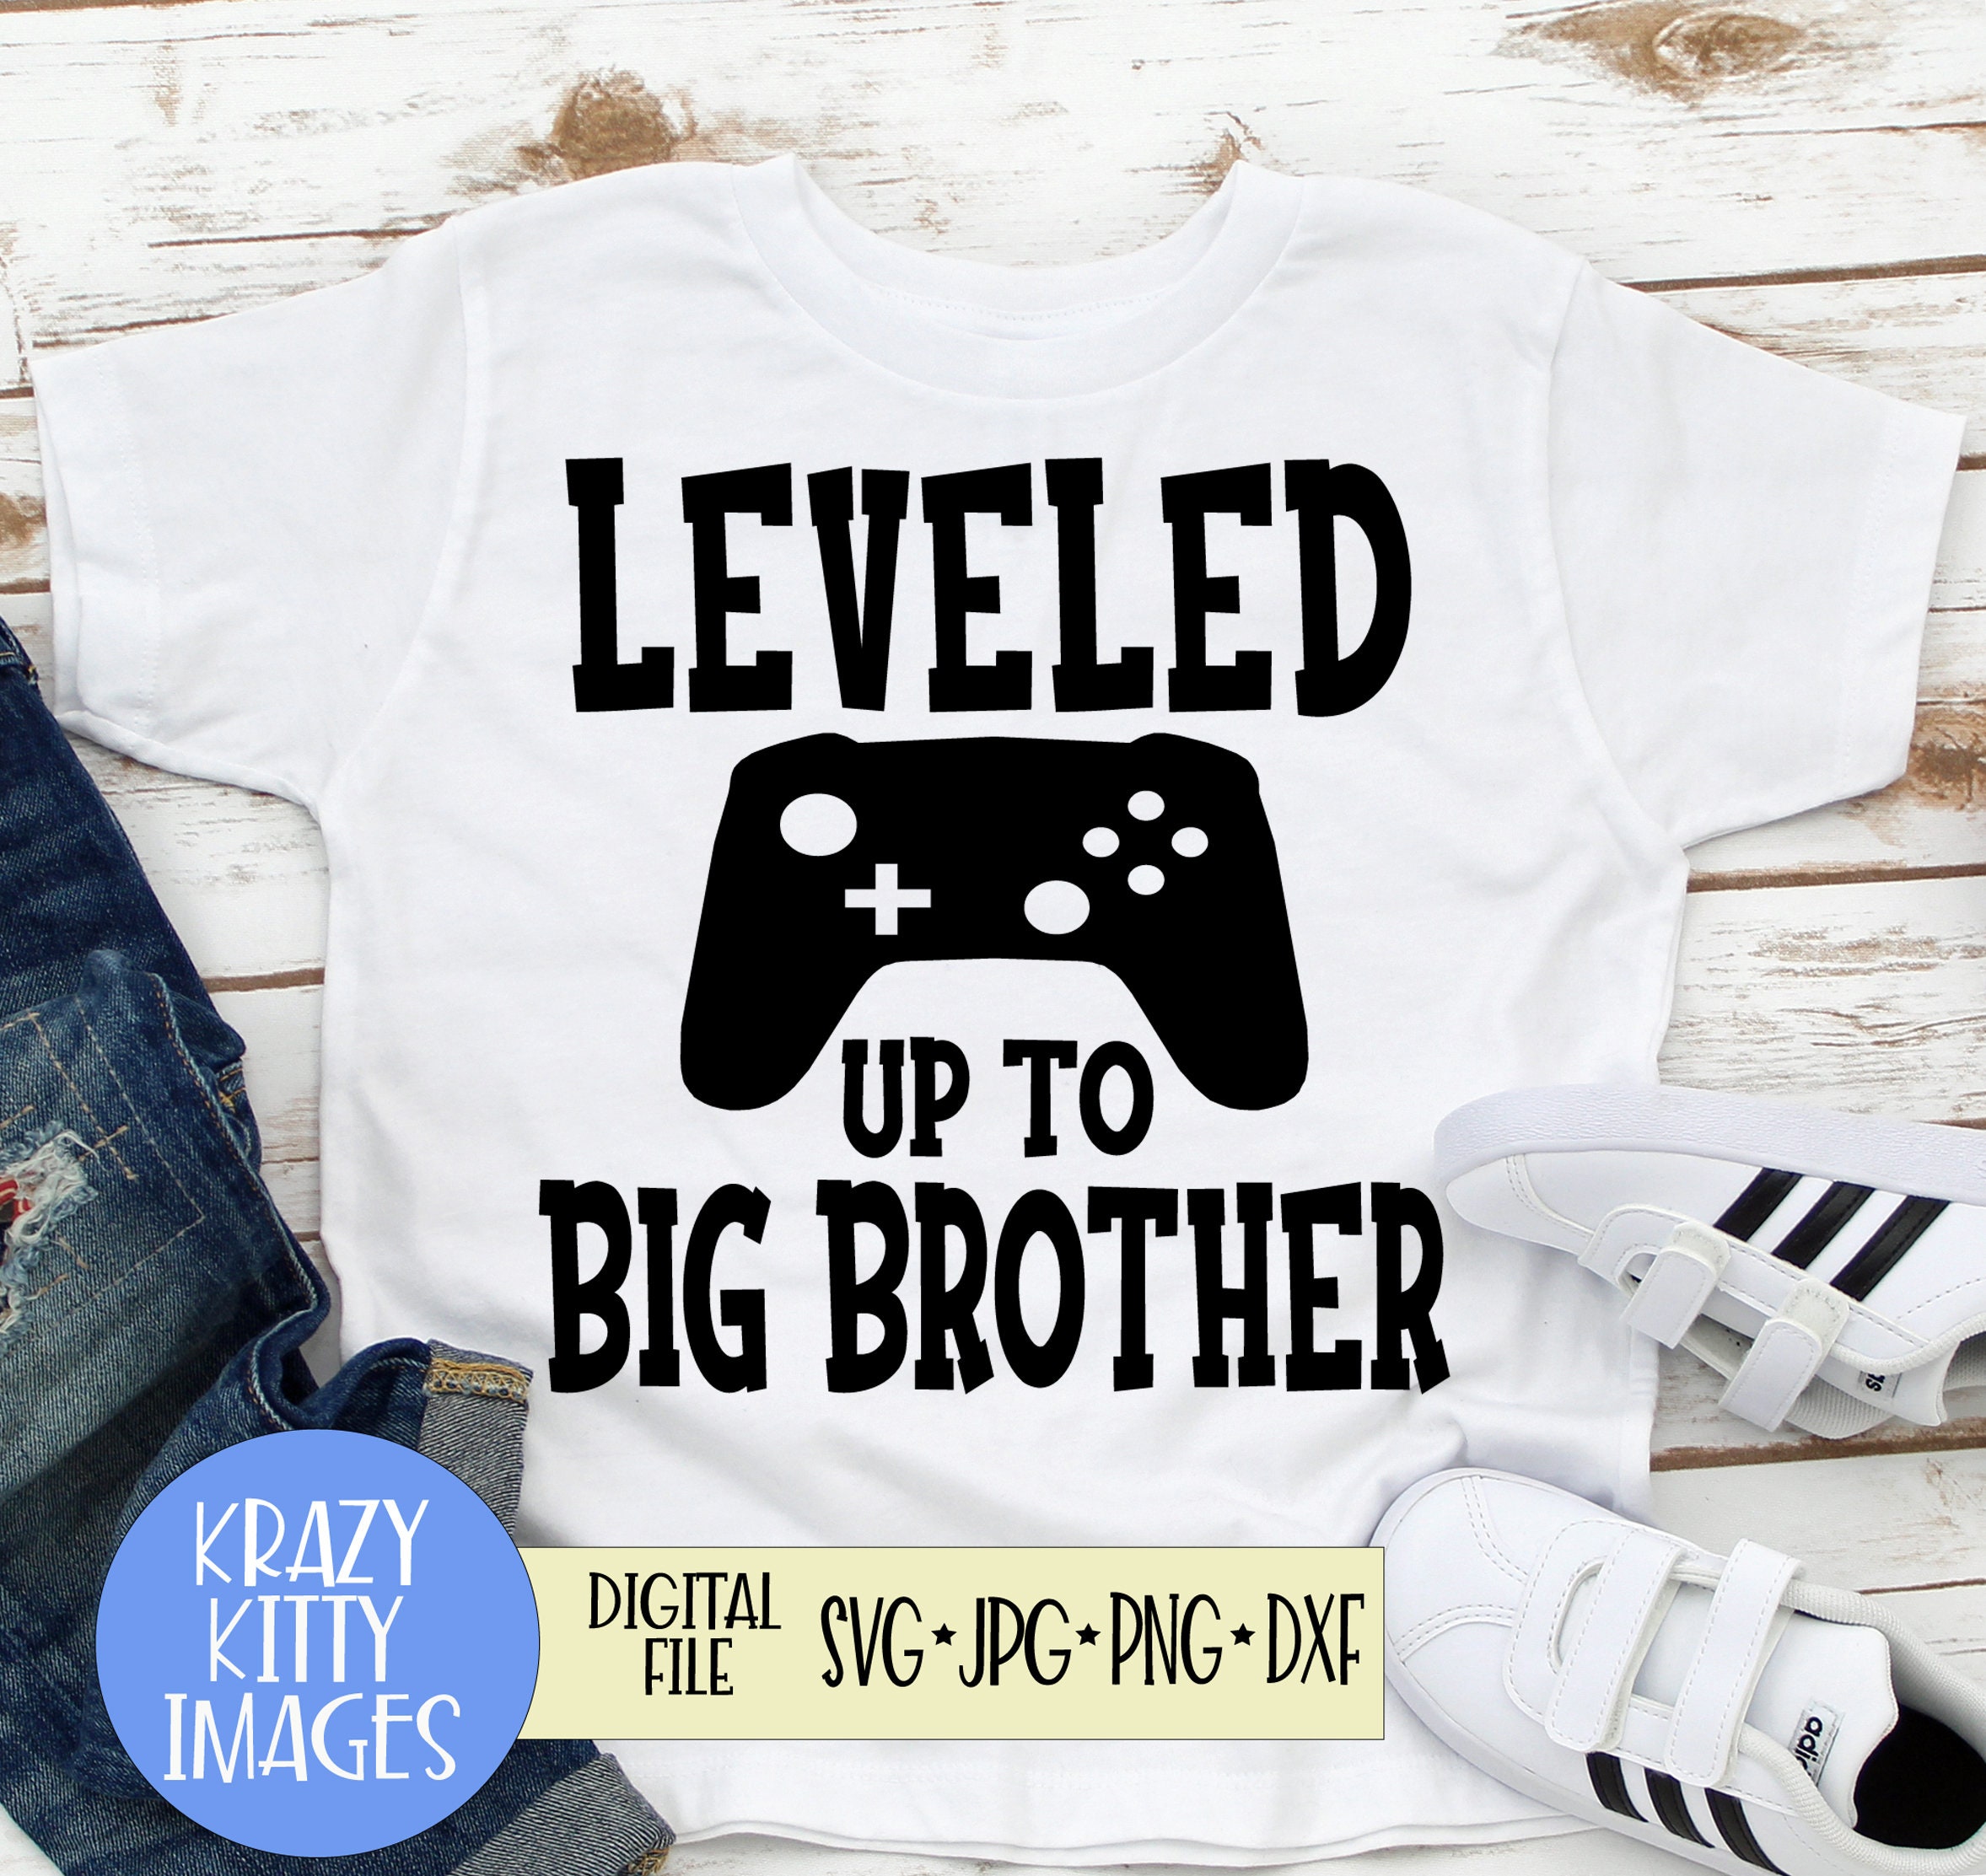 Big brother svg promoted to svg leveled up to big brother Etsy.